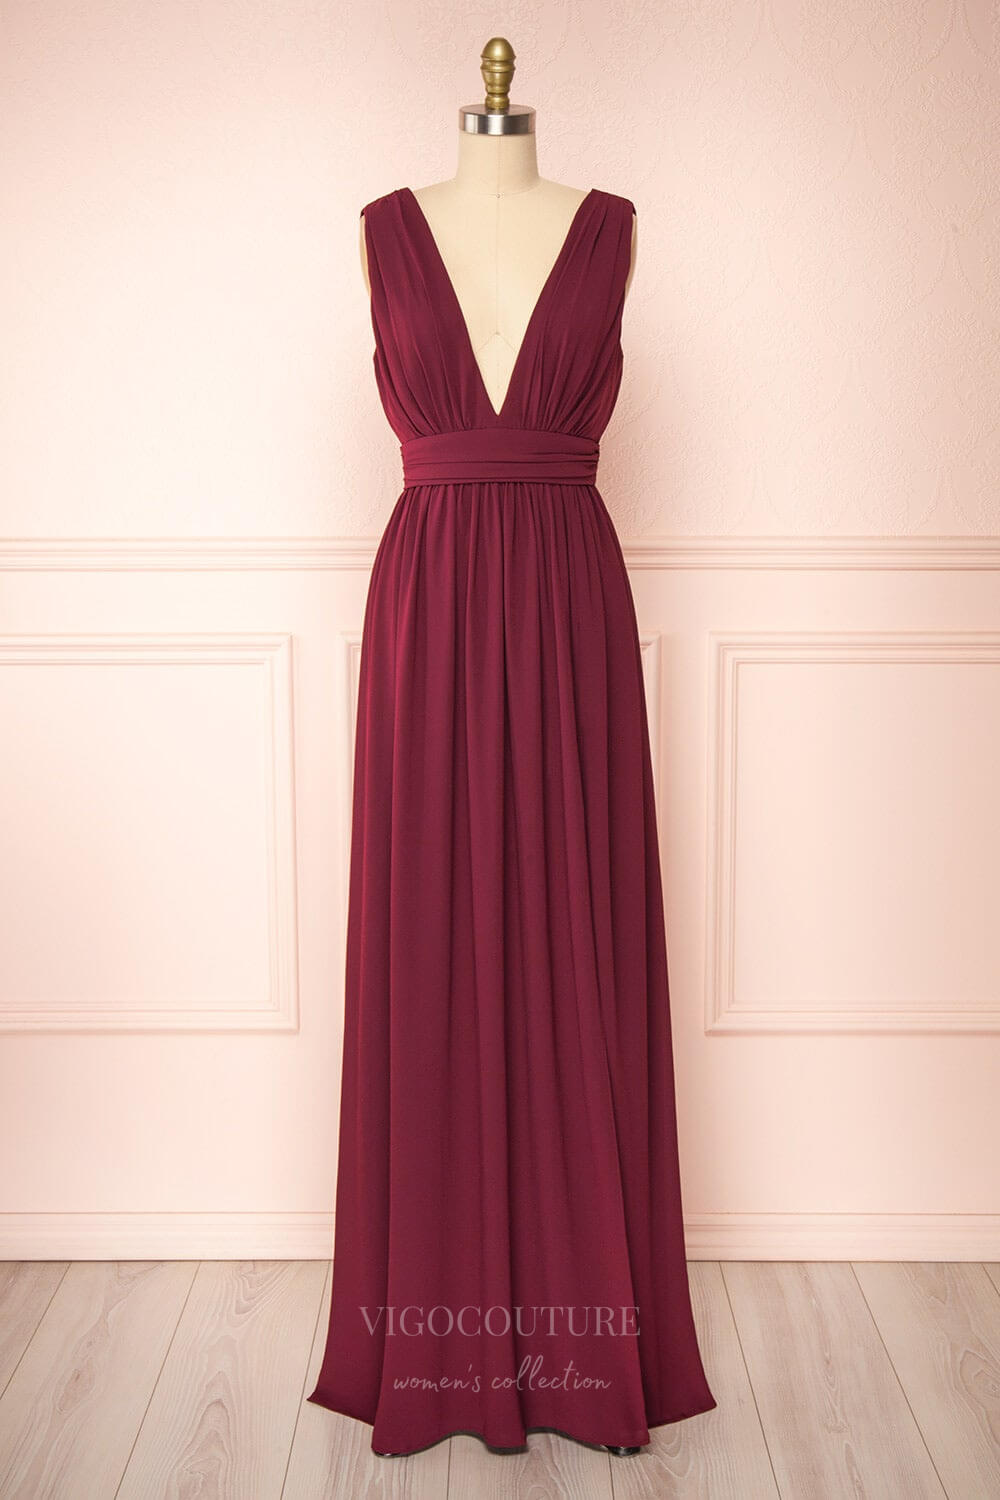 vigocouture-Stretchable Woven Bridesmaid Dress Plunging V-Neck Pleated Prom Dress 20861-Prom Dresses-vigocouture-Burgundy-US2-